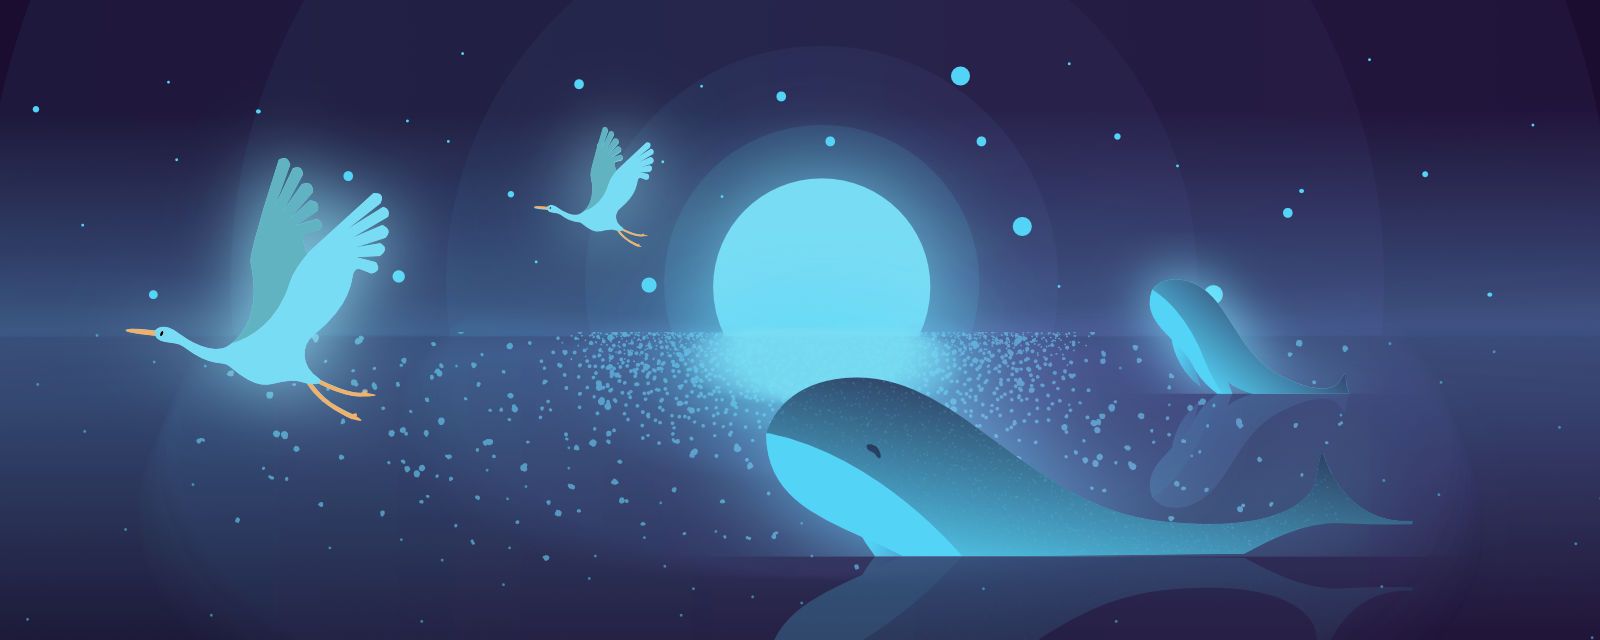 Peaceful night-time ocean scene with whales and birds